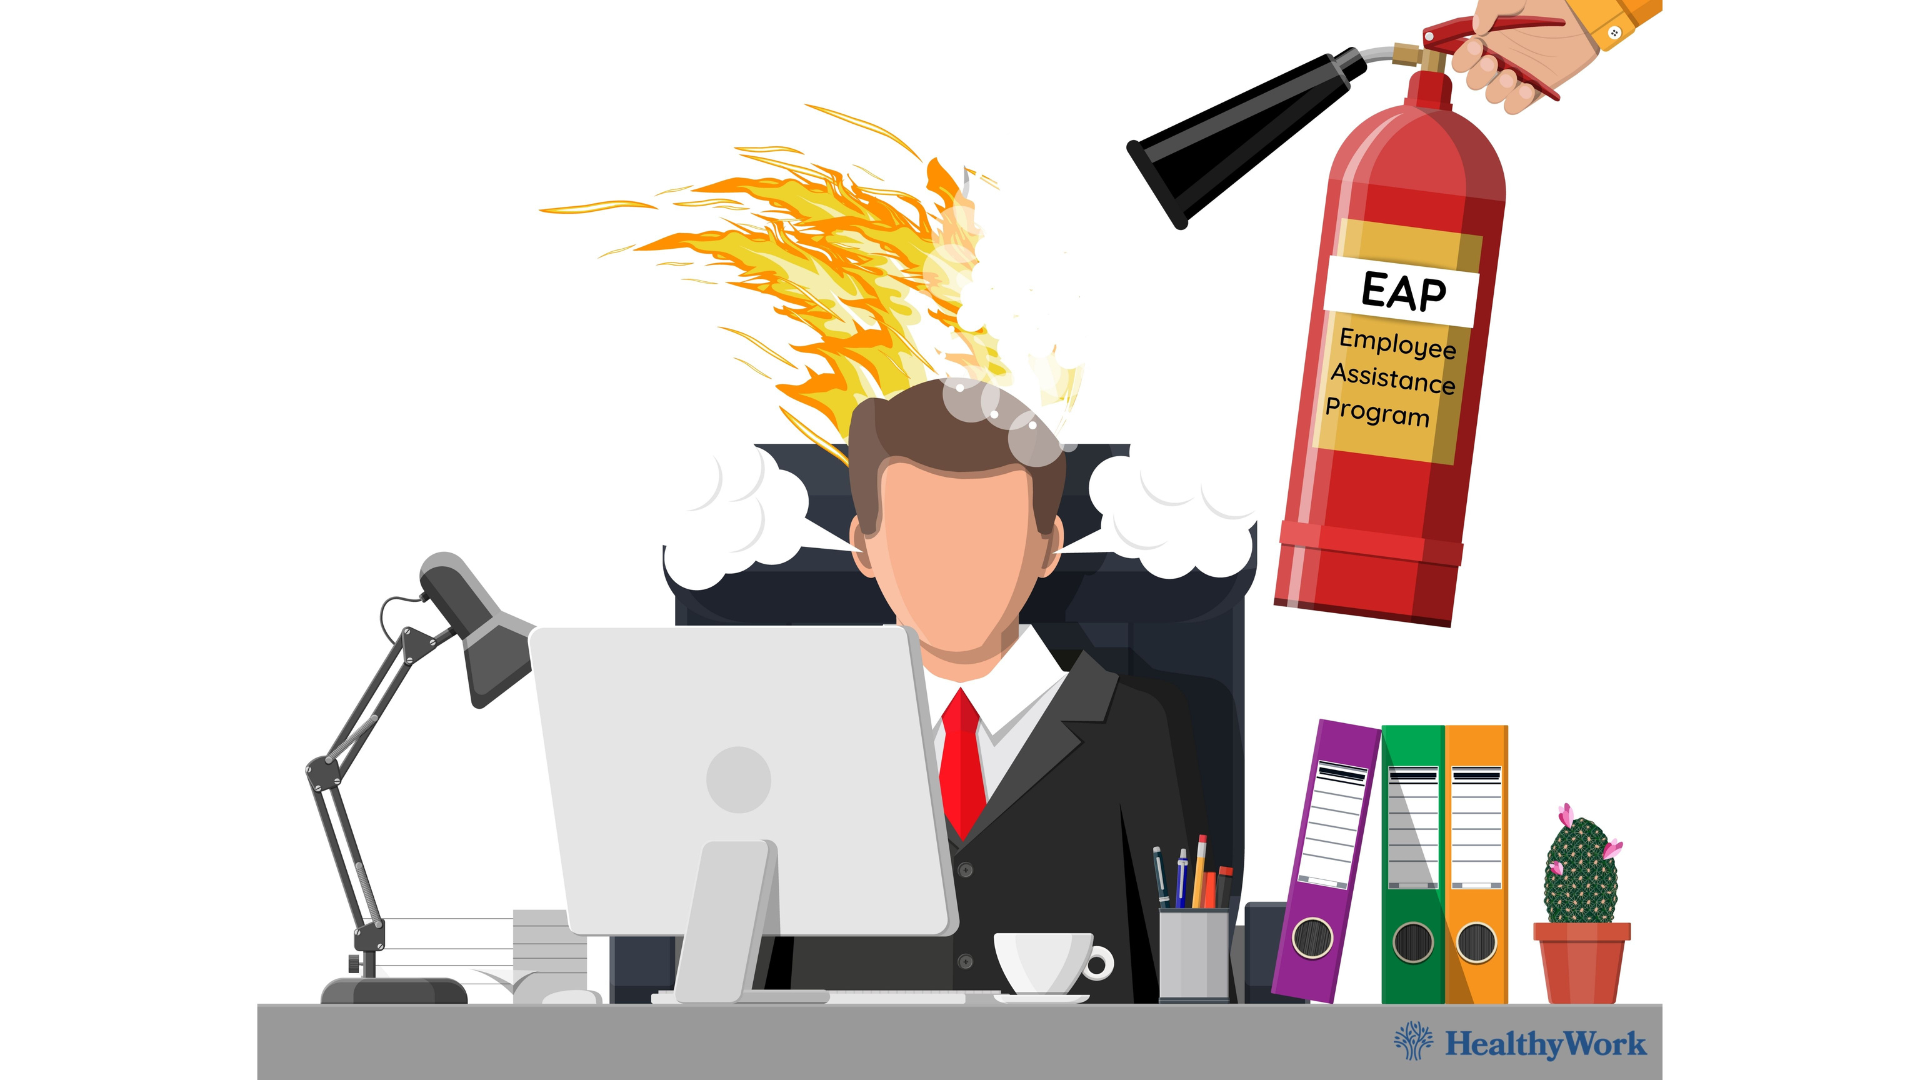 The symptoms of burnout and how to prevent it with the EAP program - #BHHMembersInitiatives